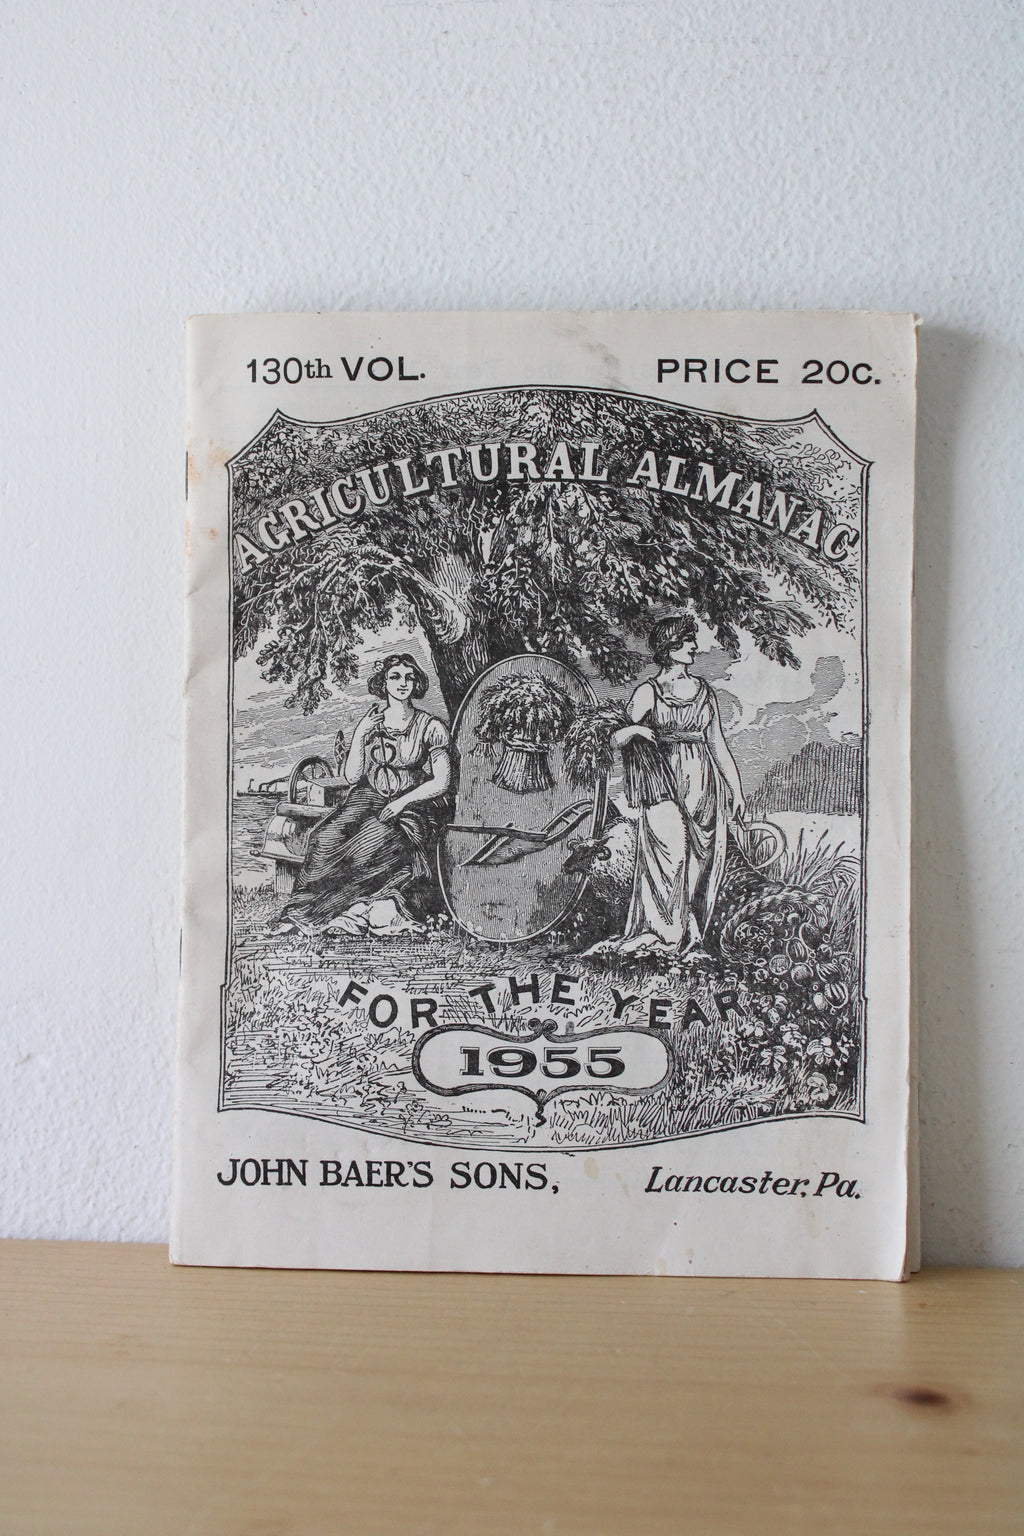 128th Volume Agricultural Almanac For The Year 1953 John Baer's Sons, Lancaster, PA